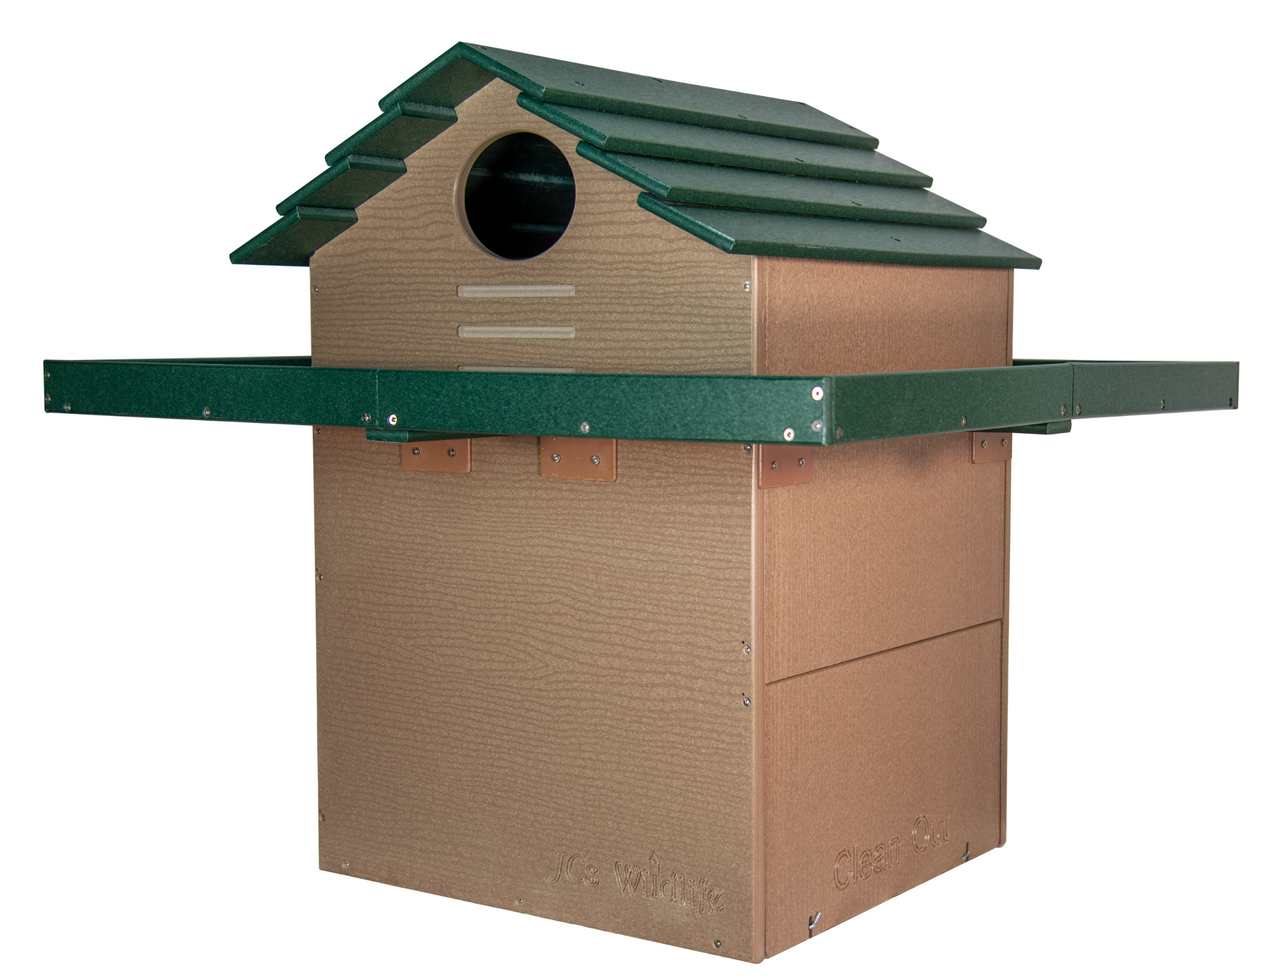 JCs Wildlife X Large Deluxe Poly Barn Owl Box with Exercise Platform - Our Biggest Barn Owl House - Made in the USA - Great for Farms, Ranches and Vineyards